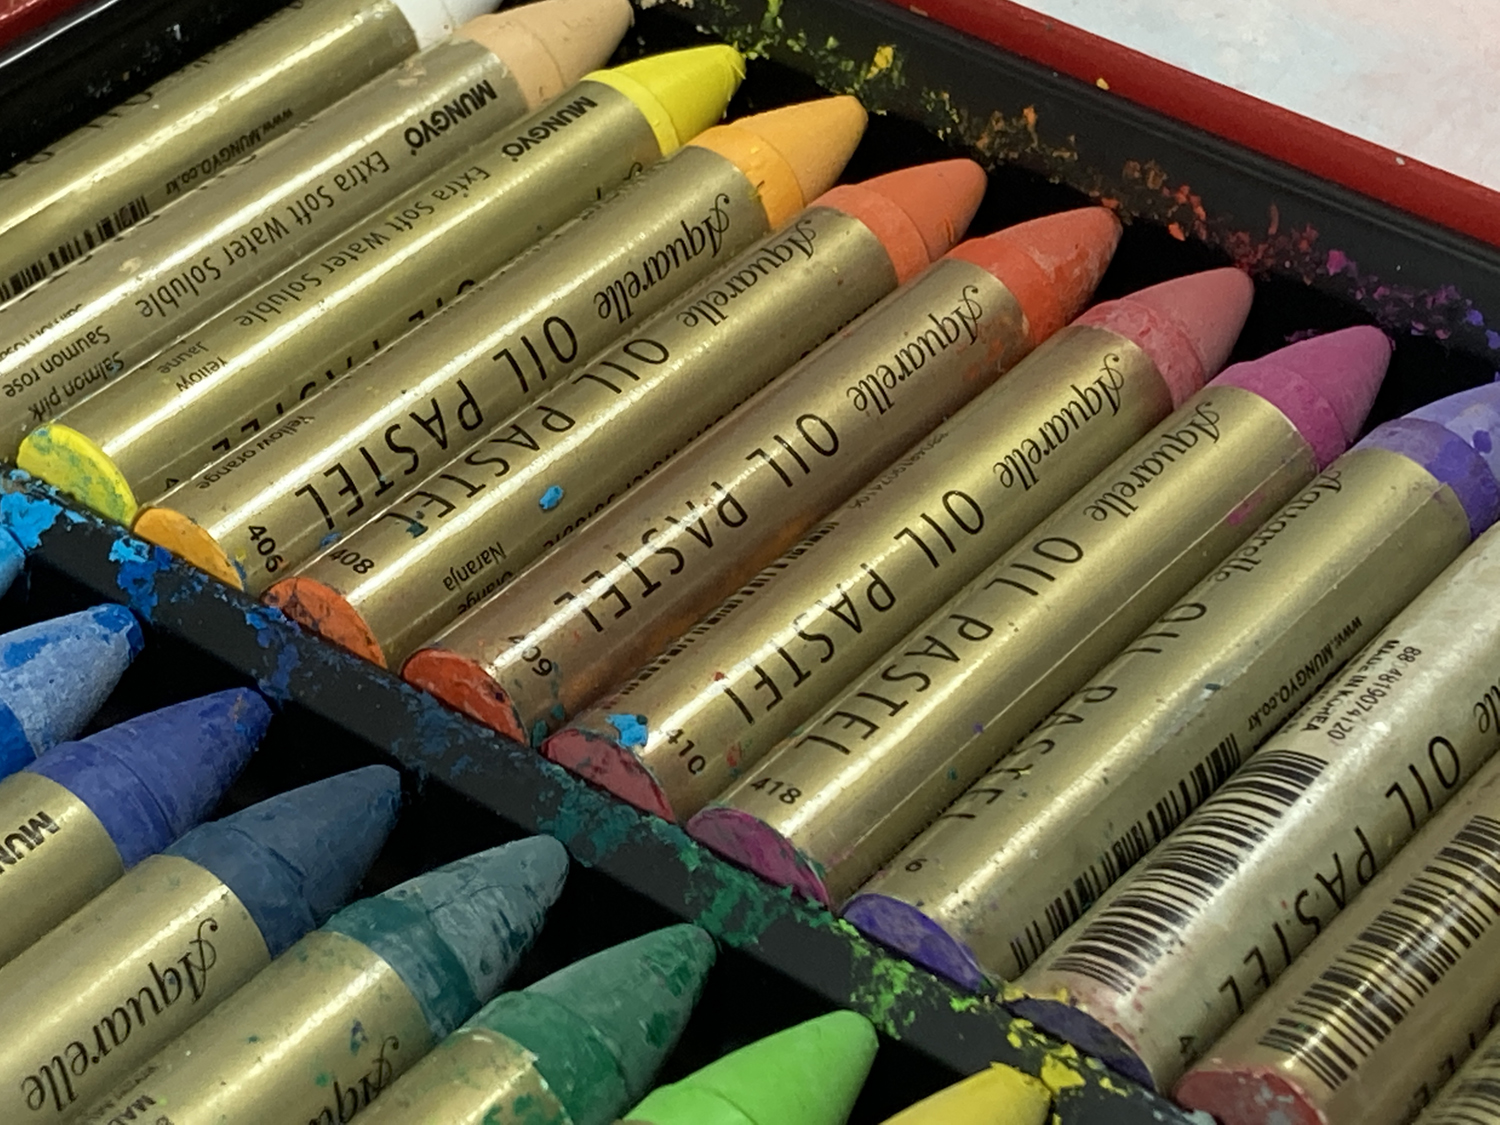 Mungyo water soluble oil pastels review – Katie Jeanne Wood